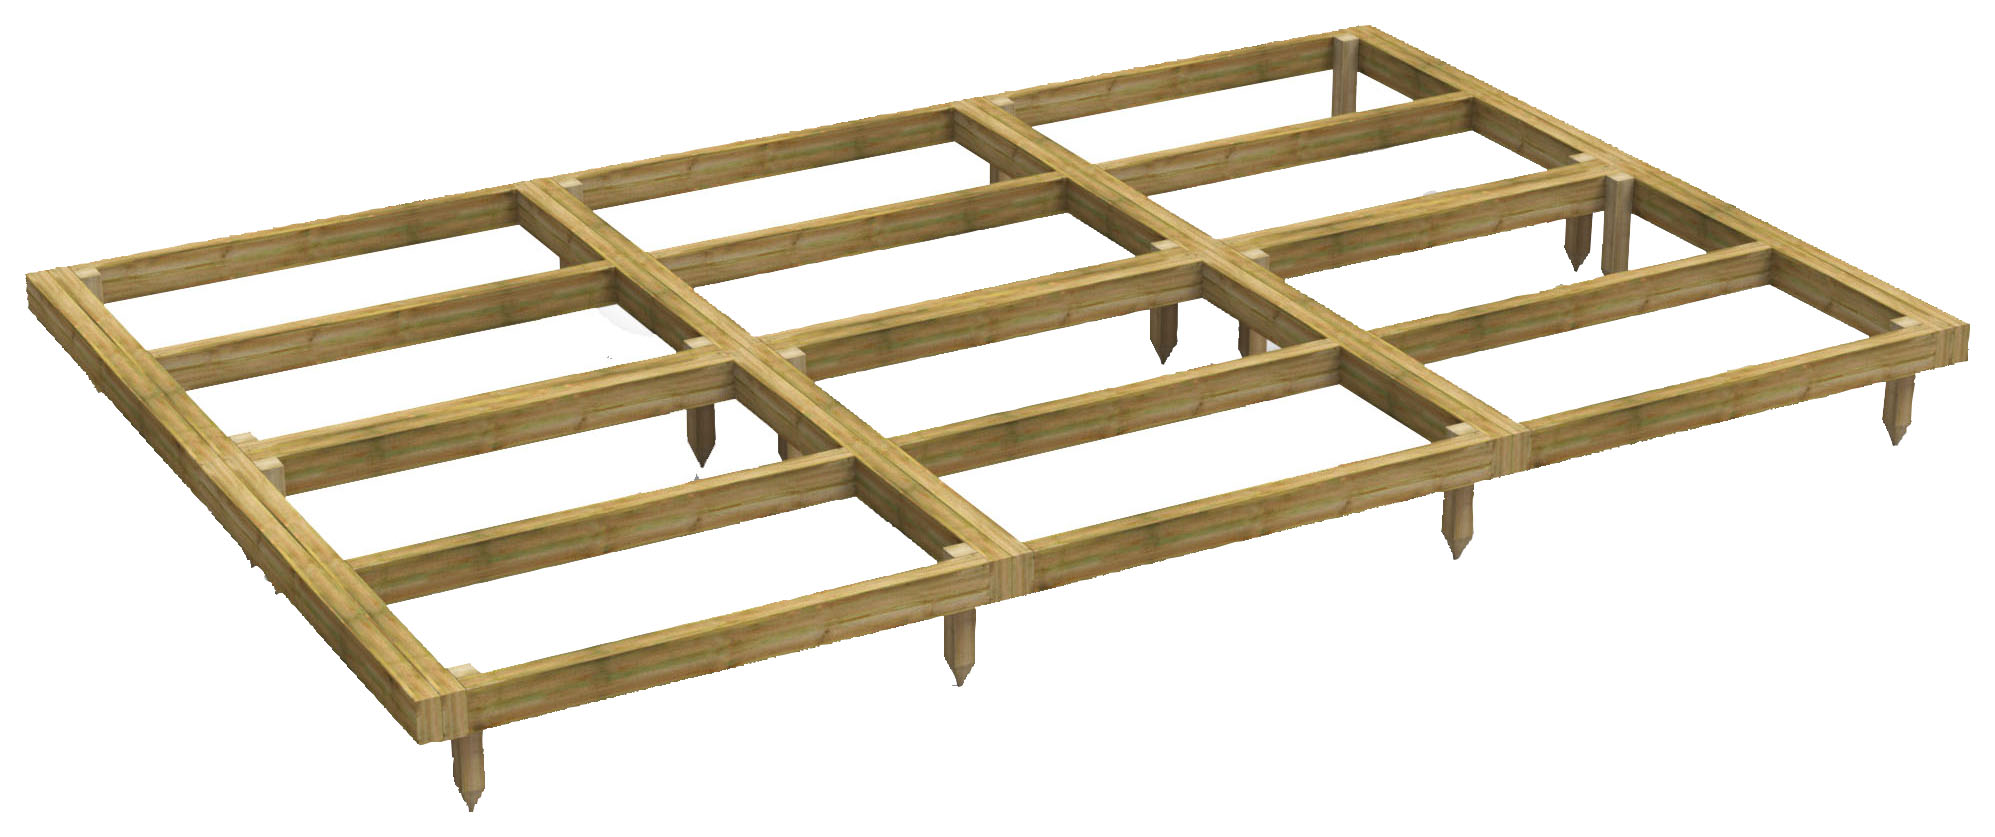 Power Sheds Pressure Treated Garden Building Base Kit - 12 x 8ft